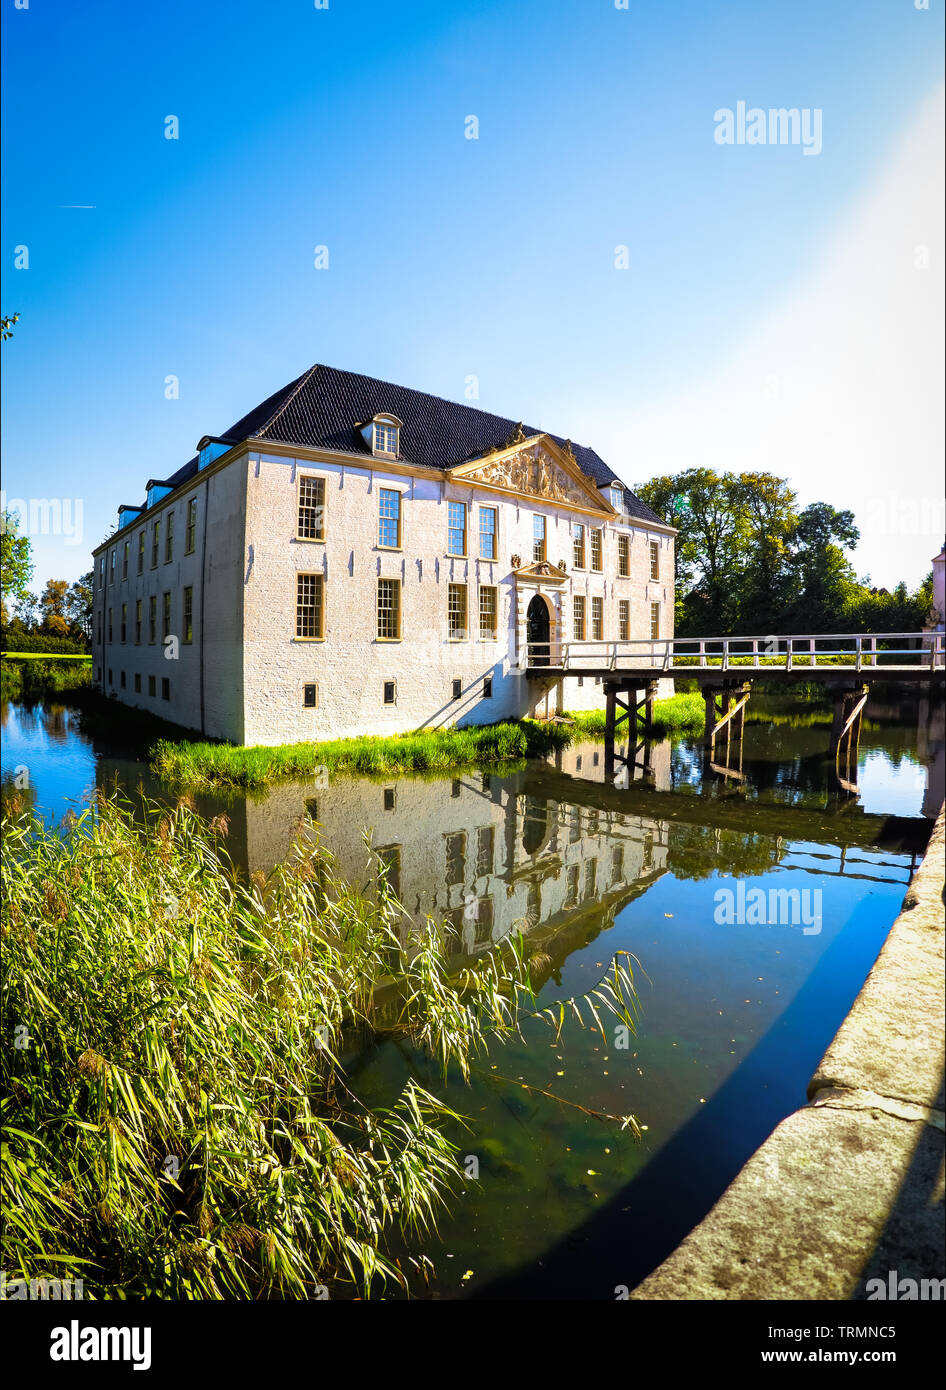 Dornum, Germany, 09/30/2015: The historic Norderburg castle in Dornum in the state of Lower Saxony. The water castle is surrounded by a water ditch. I Stock Photo